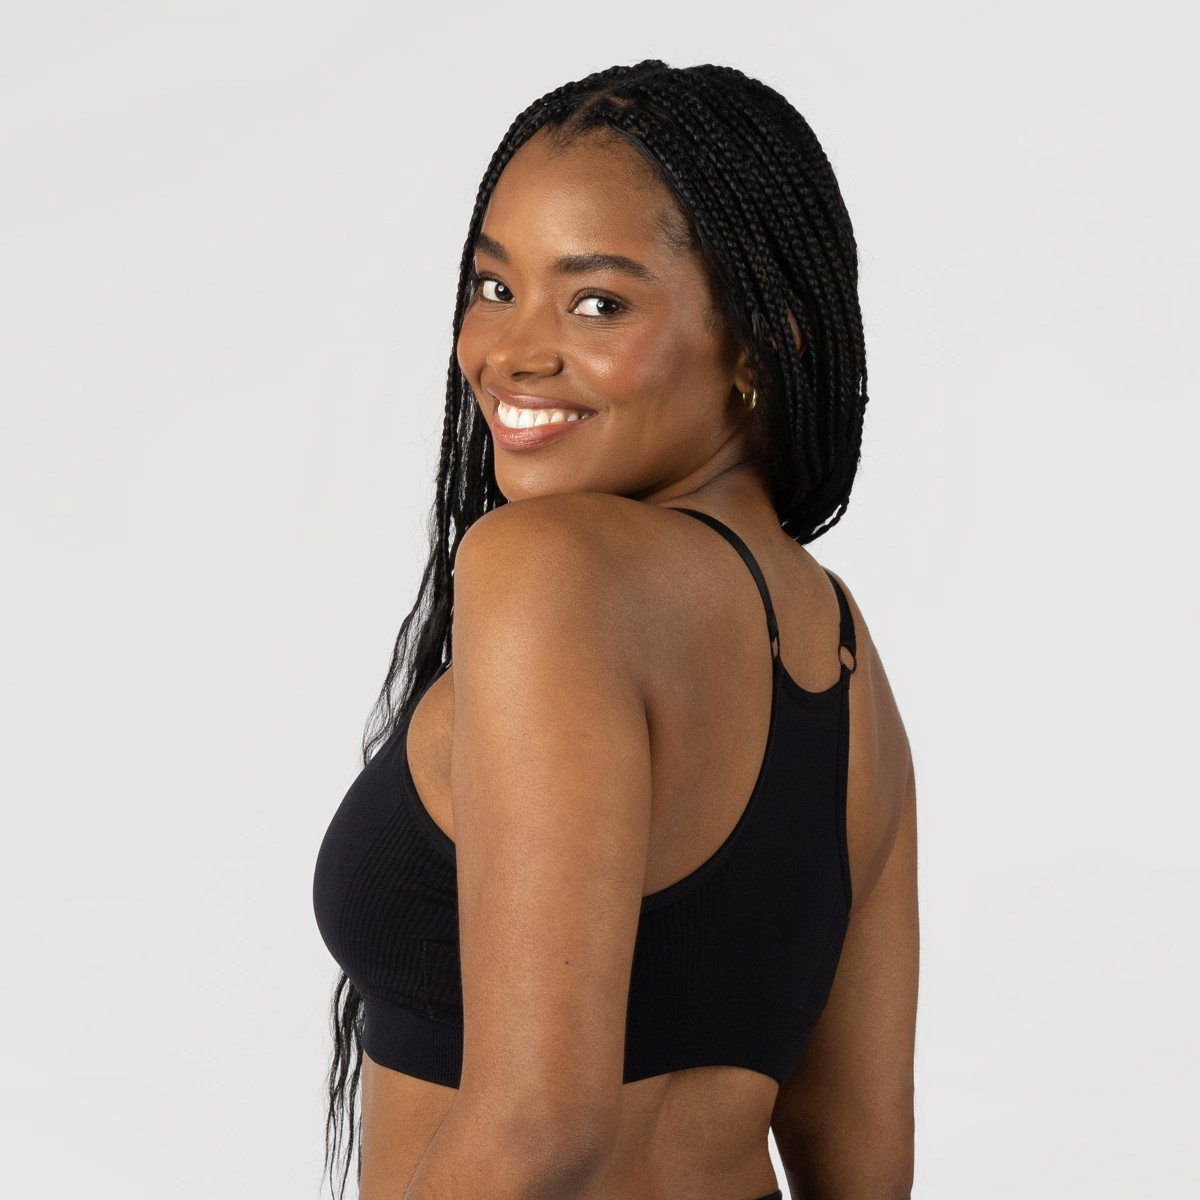 kindred by Kindred Bravely Women's Sports Pumping & Nursing Bra - Black XXL  1 ct